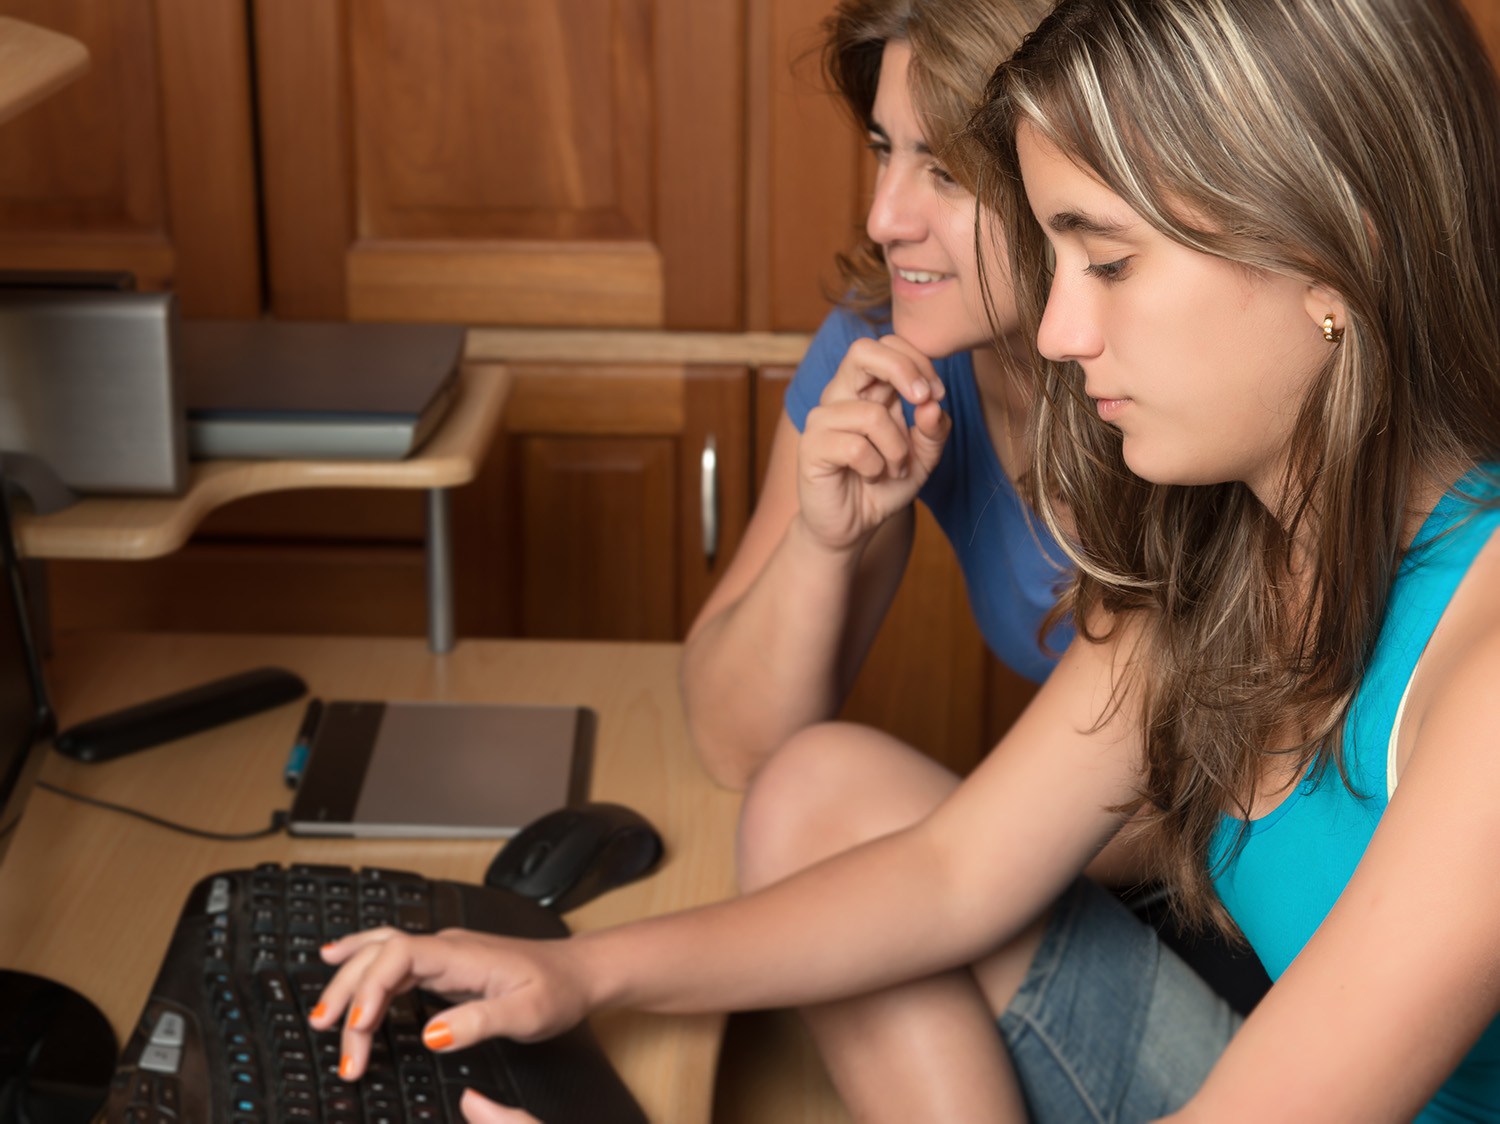 Teen girl on laptop with mom's support